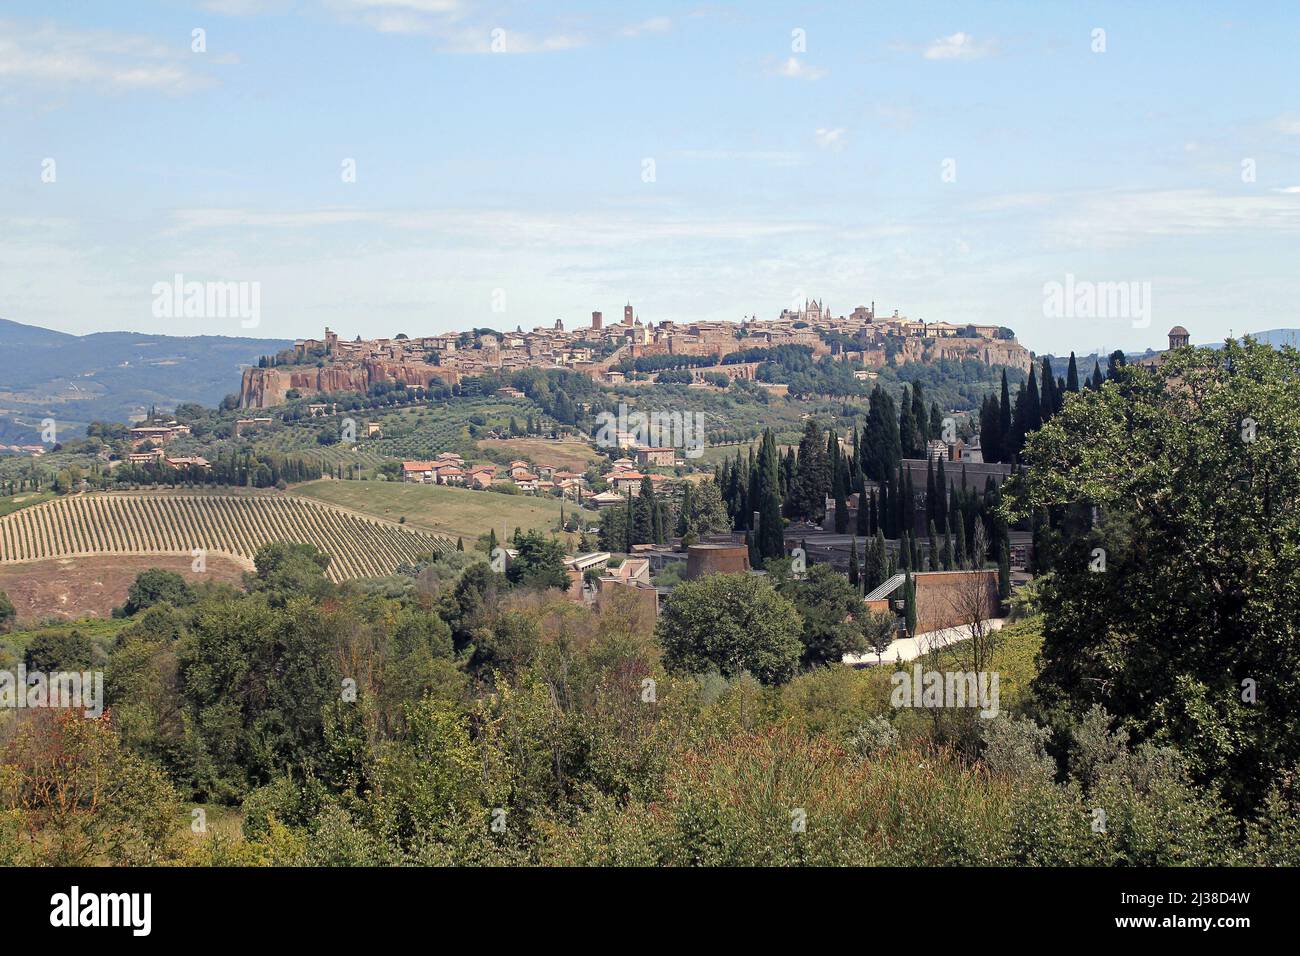 Panoramic view of the city of Orvieto standing on a hill in the center of Italy Stock Photo